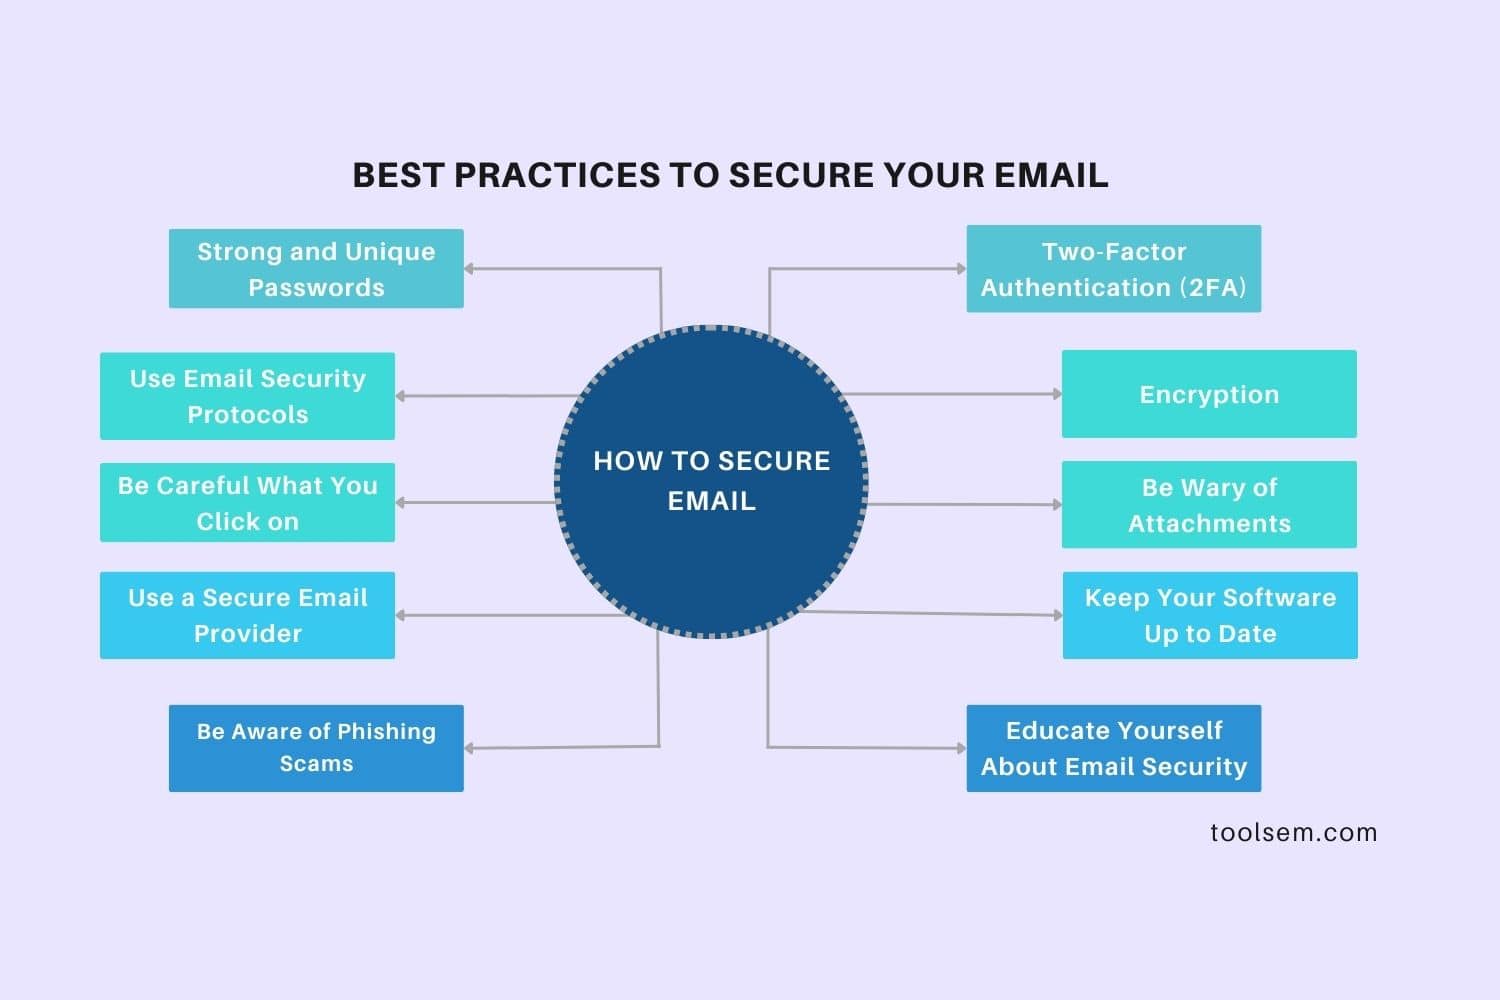 How to Secure Email: Best Practices